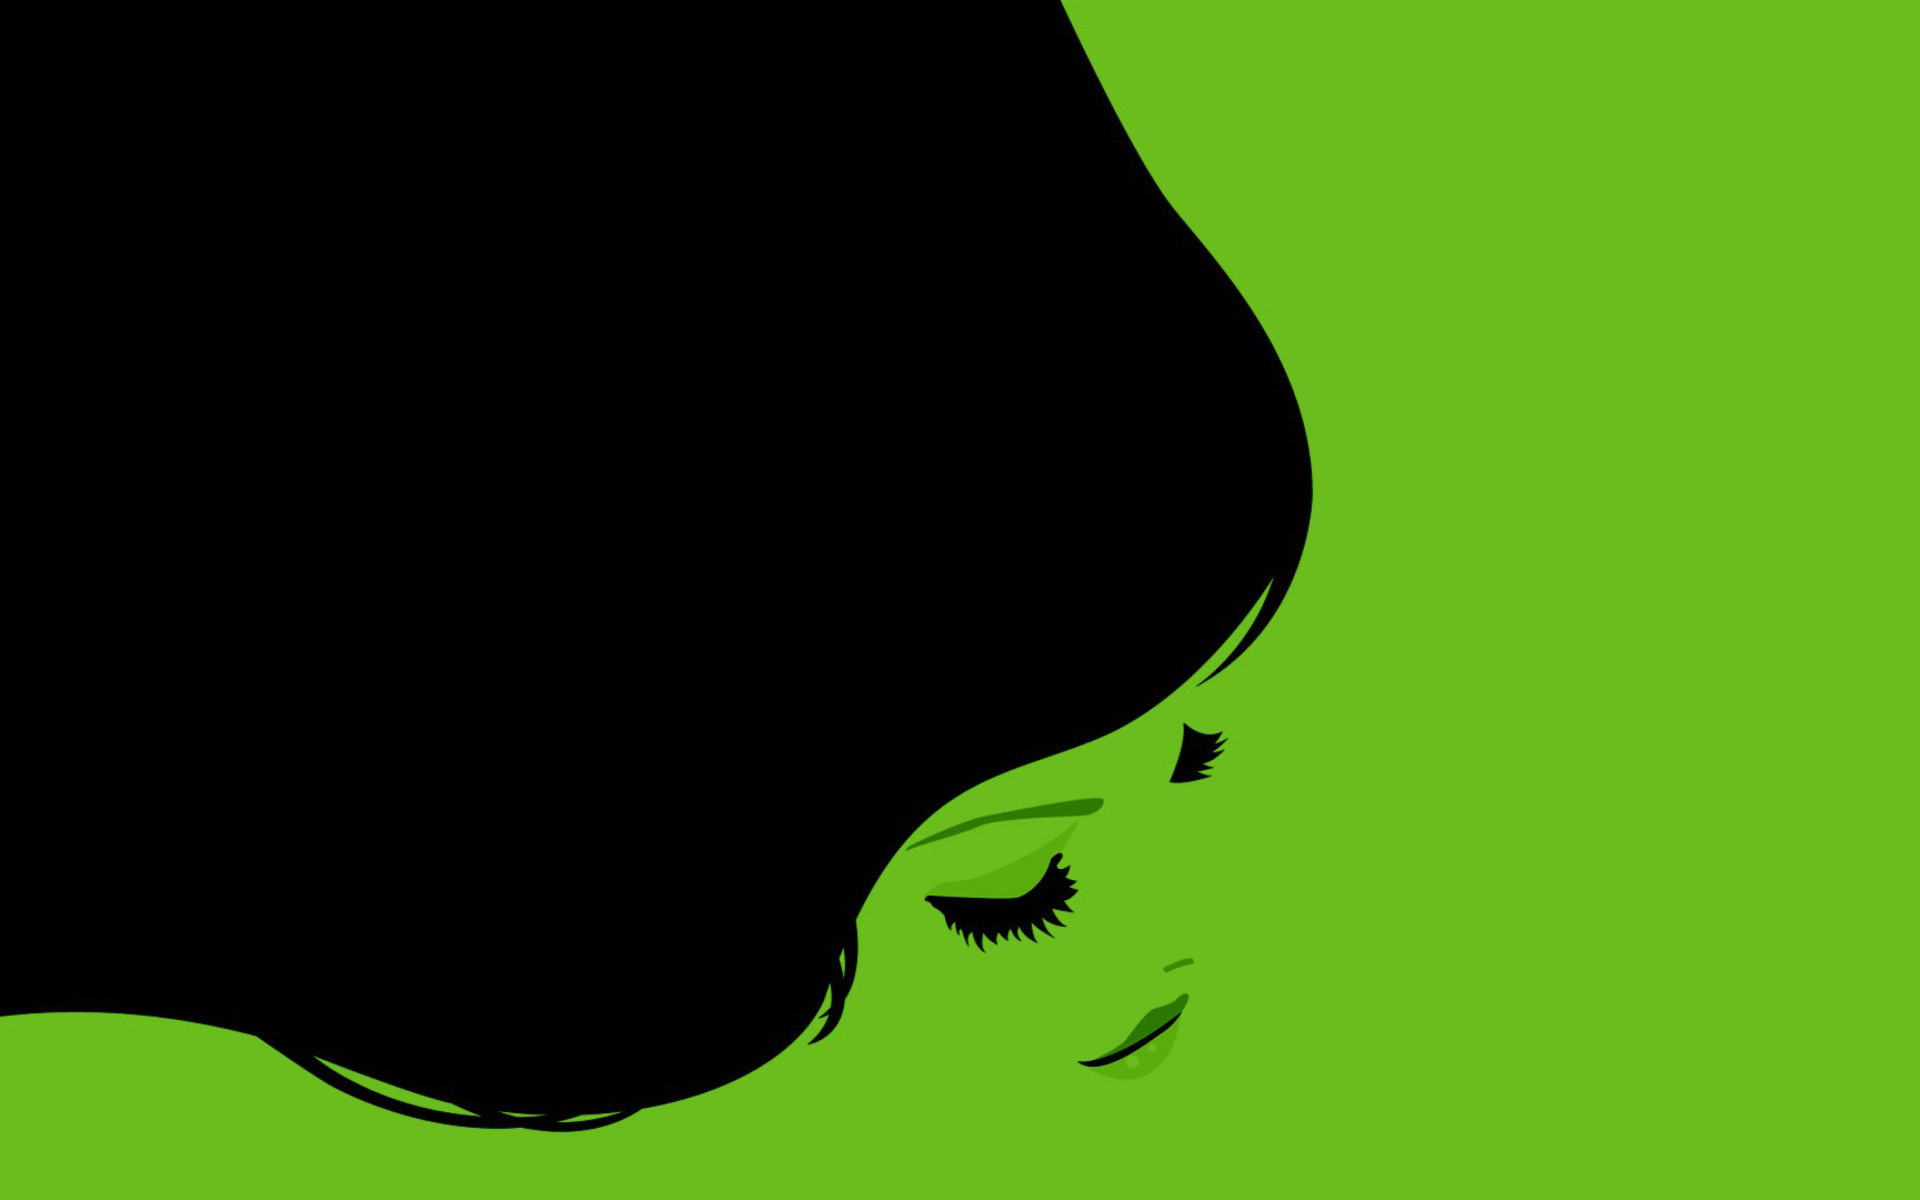 Girl's Face On Green Background wallpaper 1920x1200